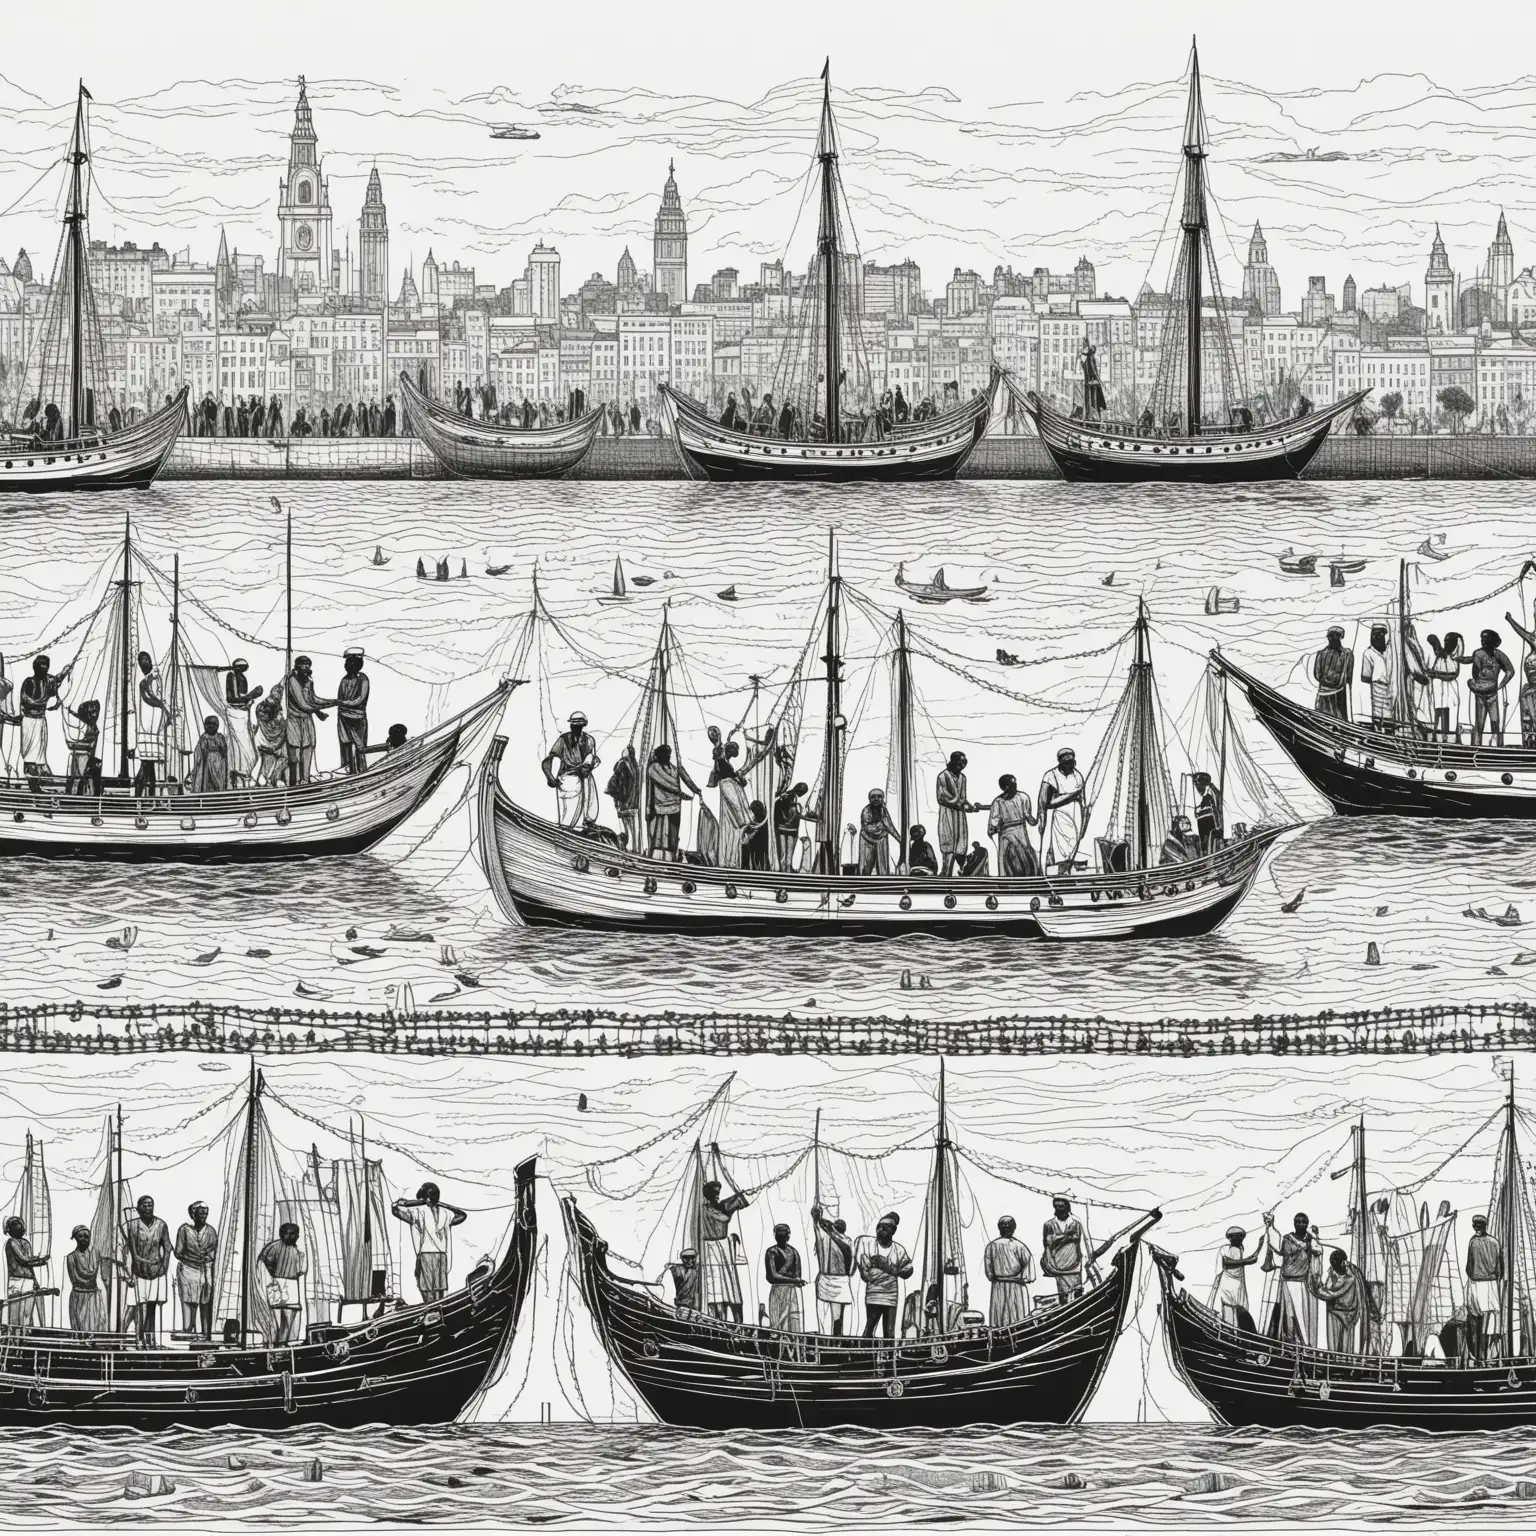 West African Style Black and White Line Drawing Depicting Liverpools Slavery History